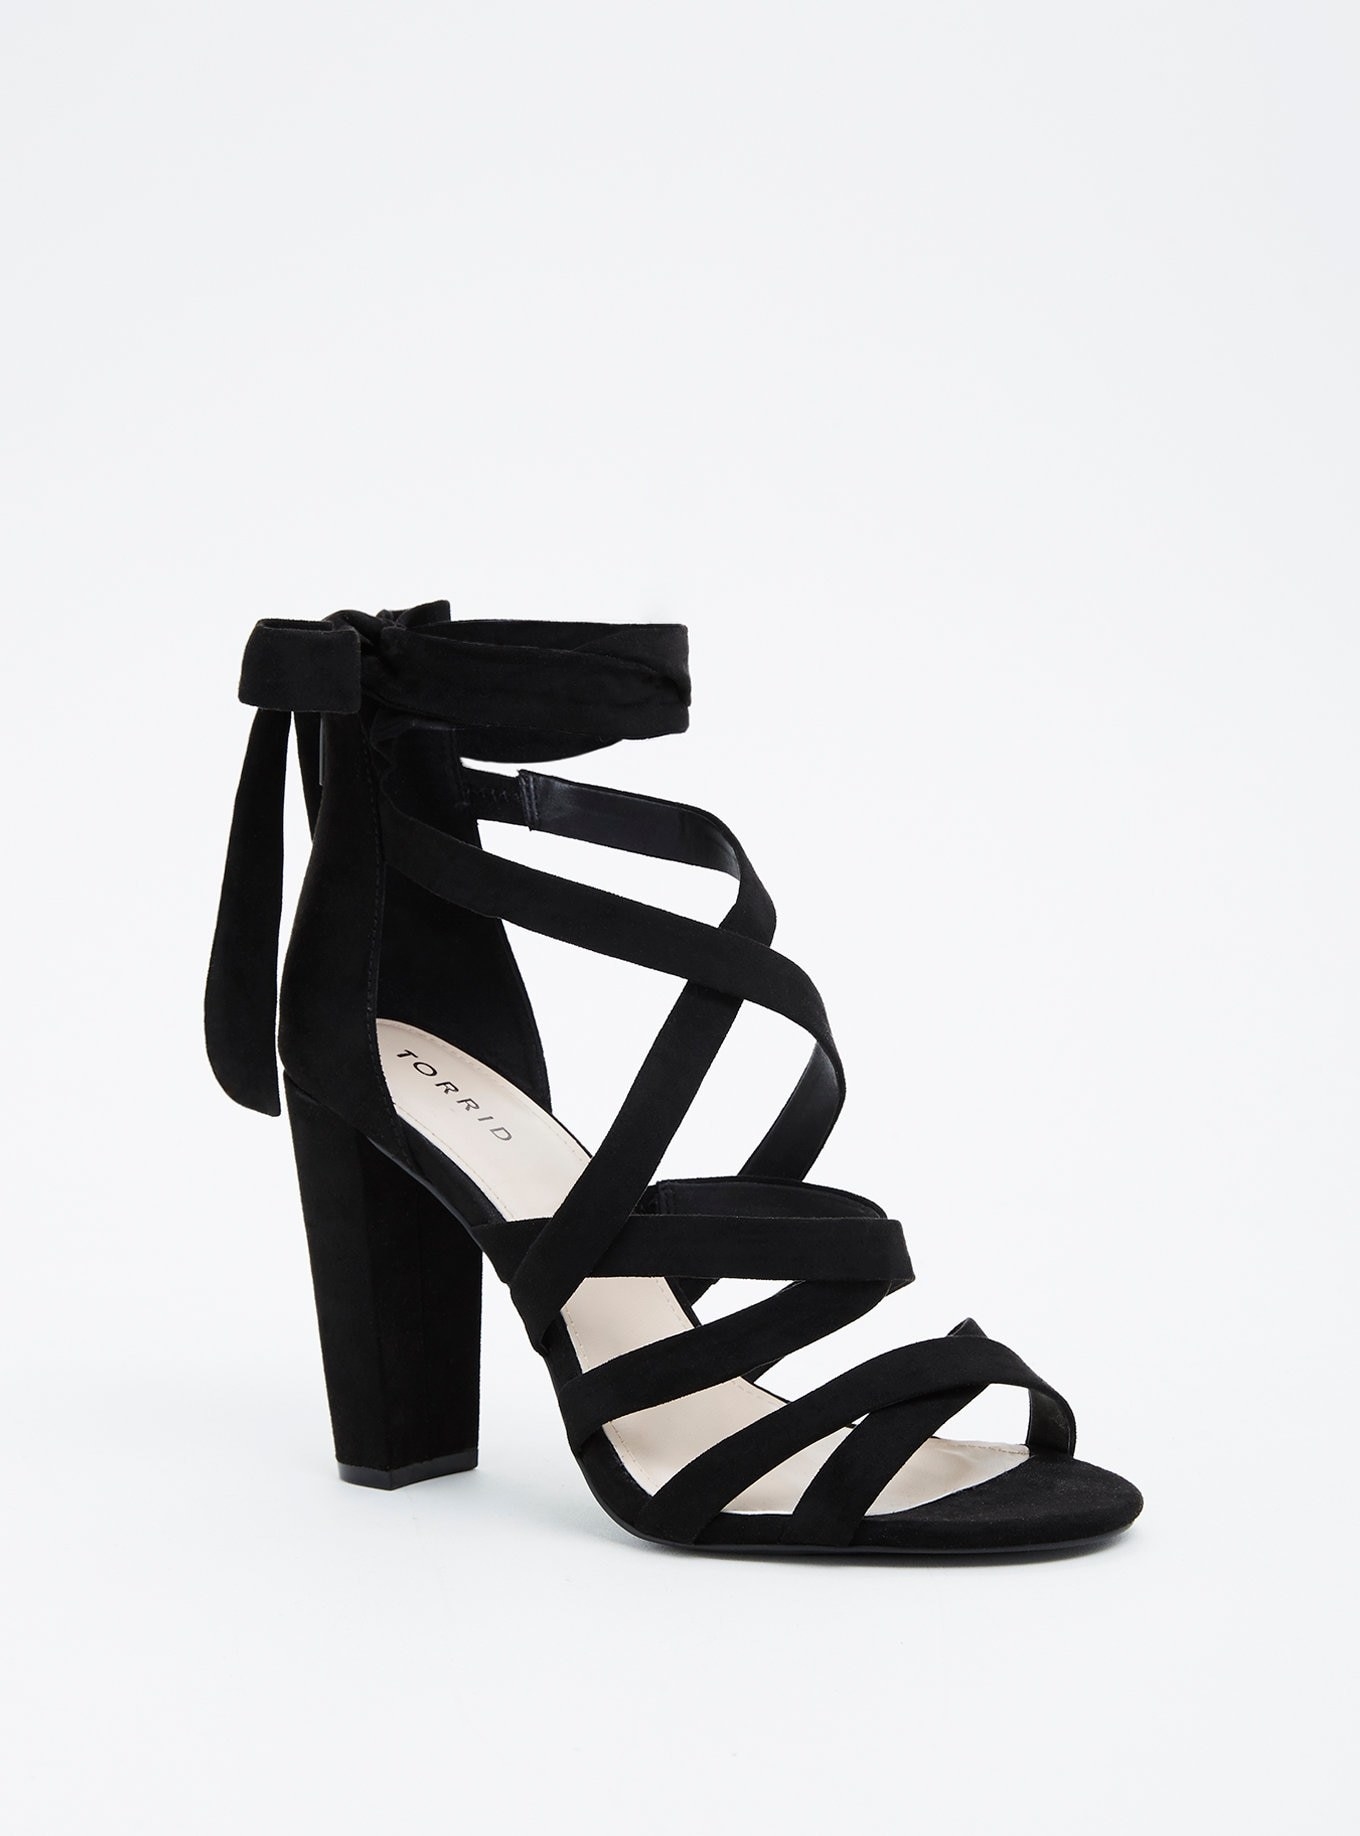 26 Comfy Pairs Of Heeled Sandals You 